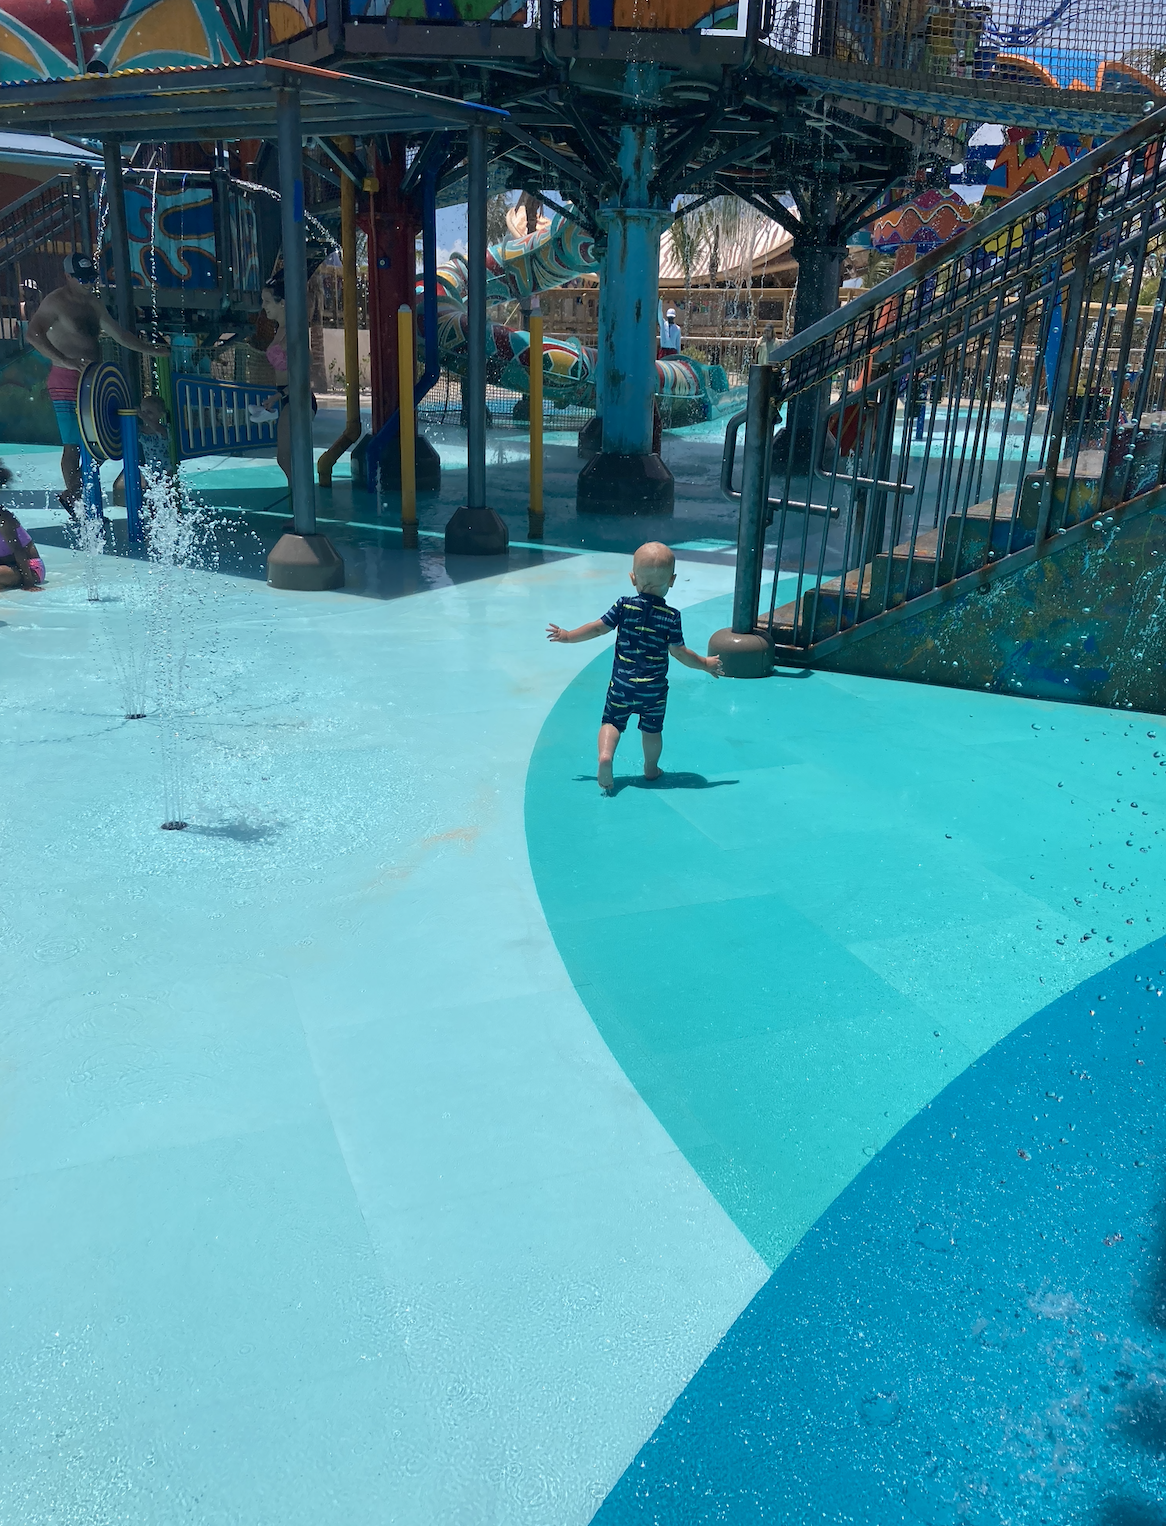 A toddler in a swimsuit is walking alone in a splash pad water play area with various water features and slides in the background